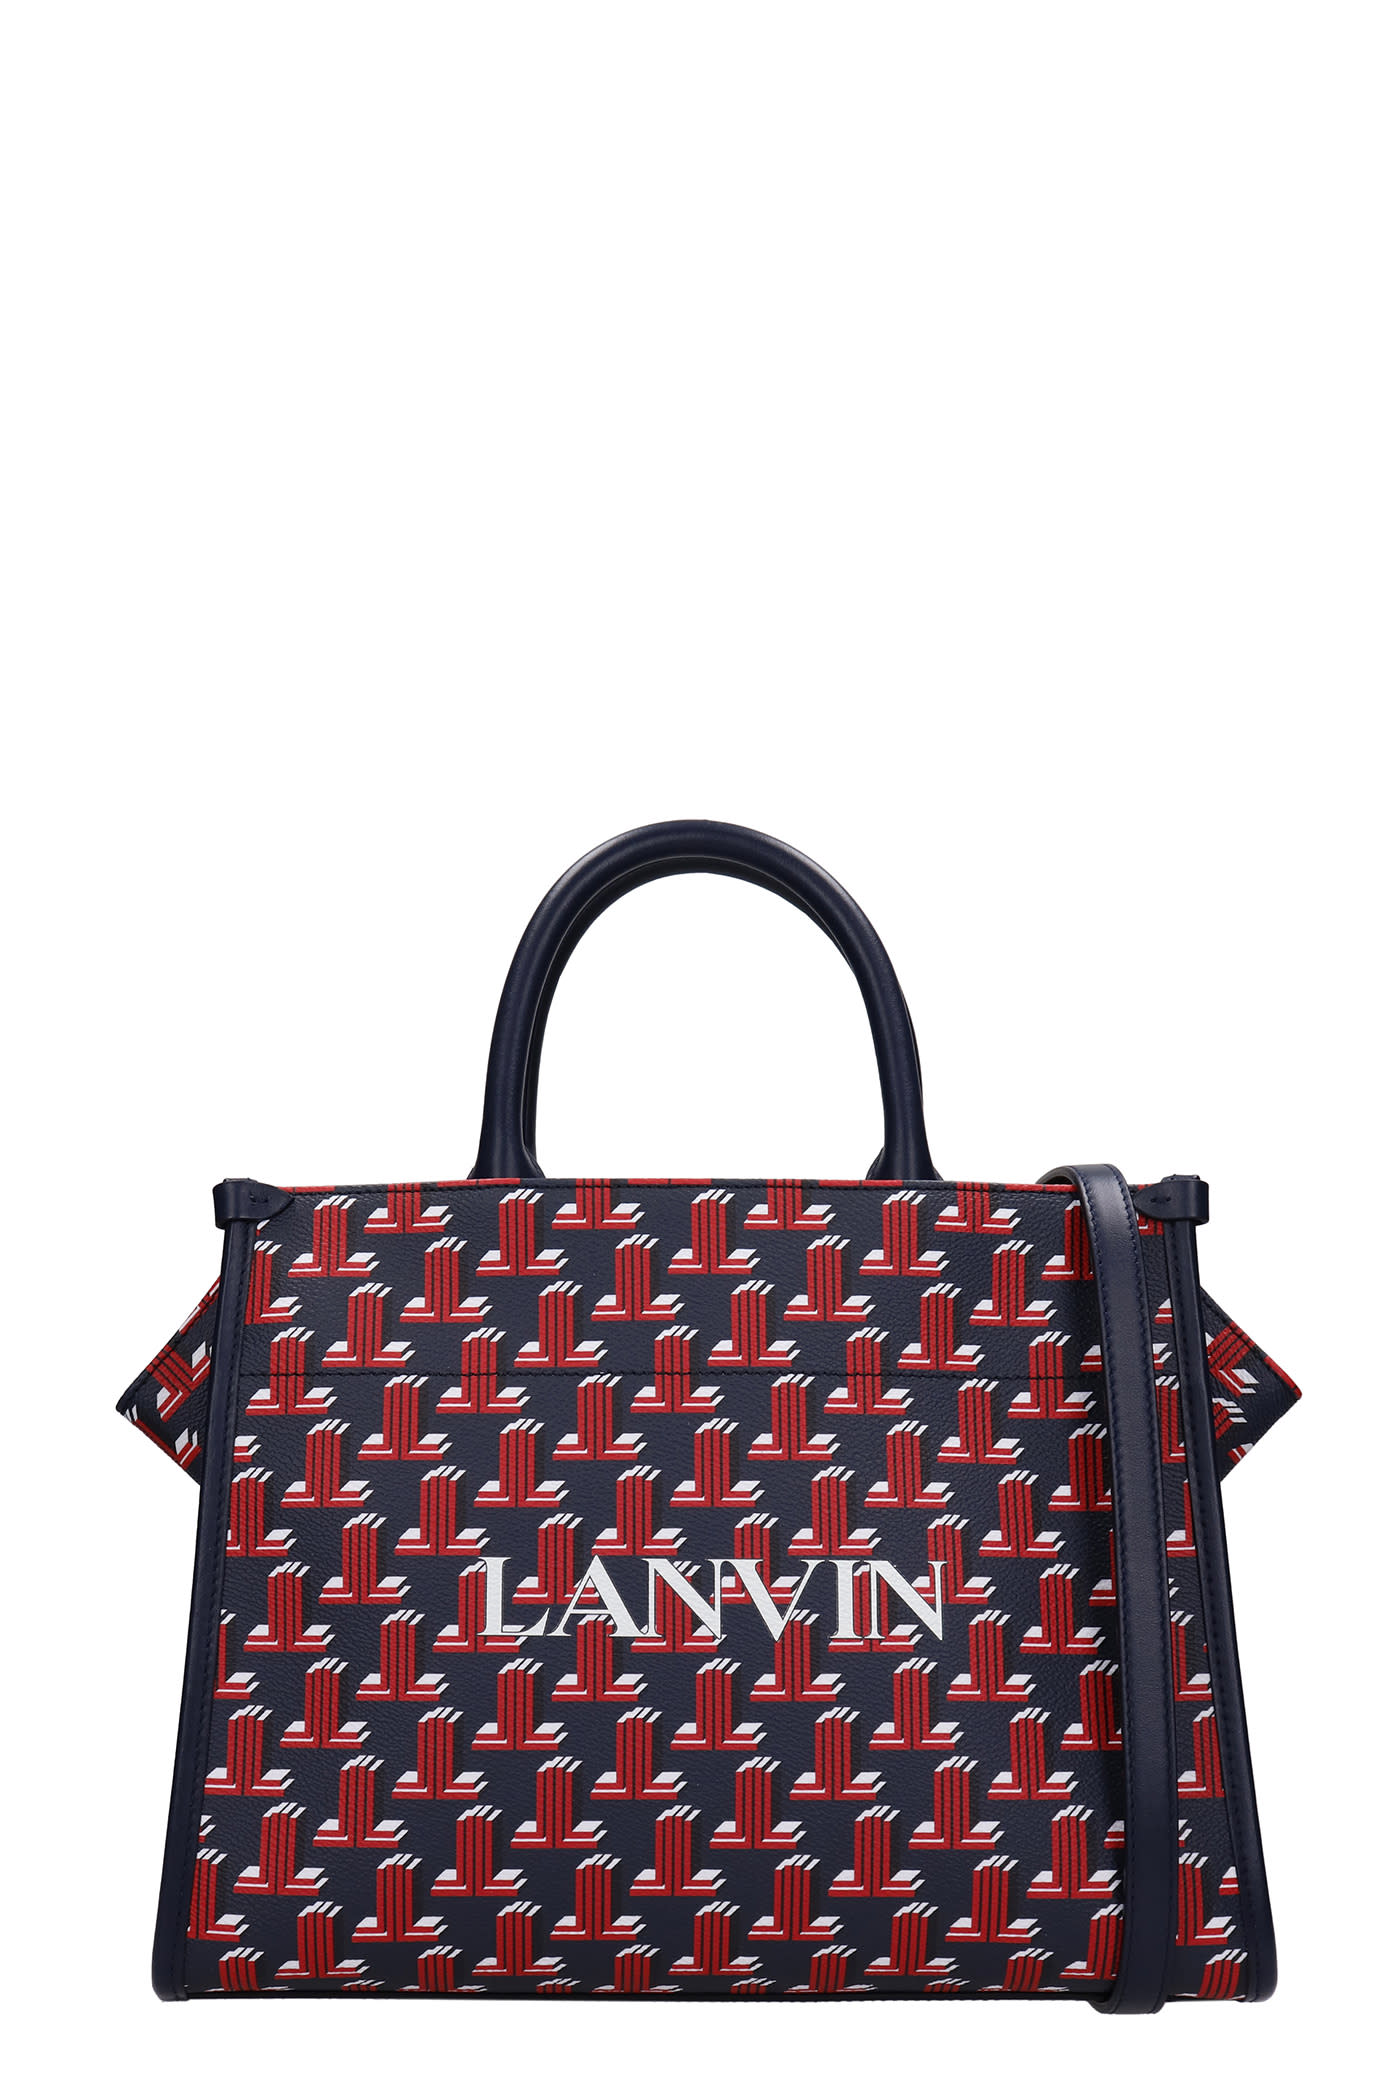 Lanvin Tote In Red Leather